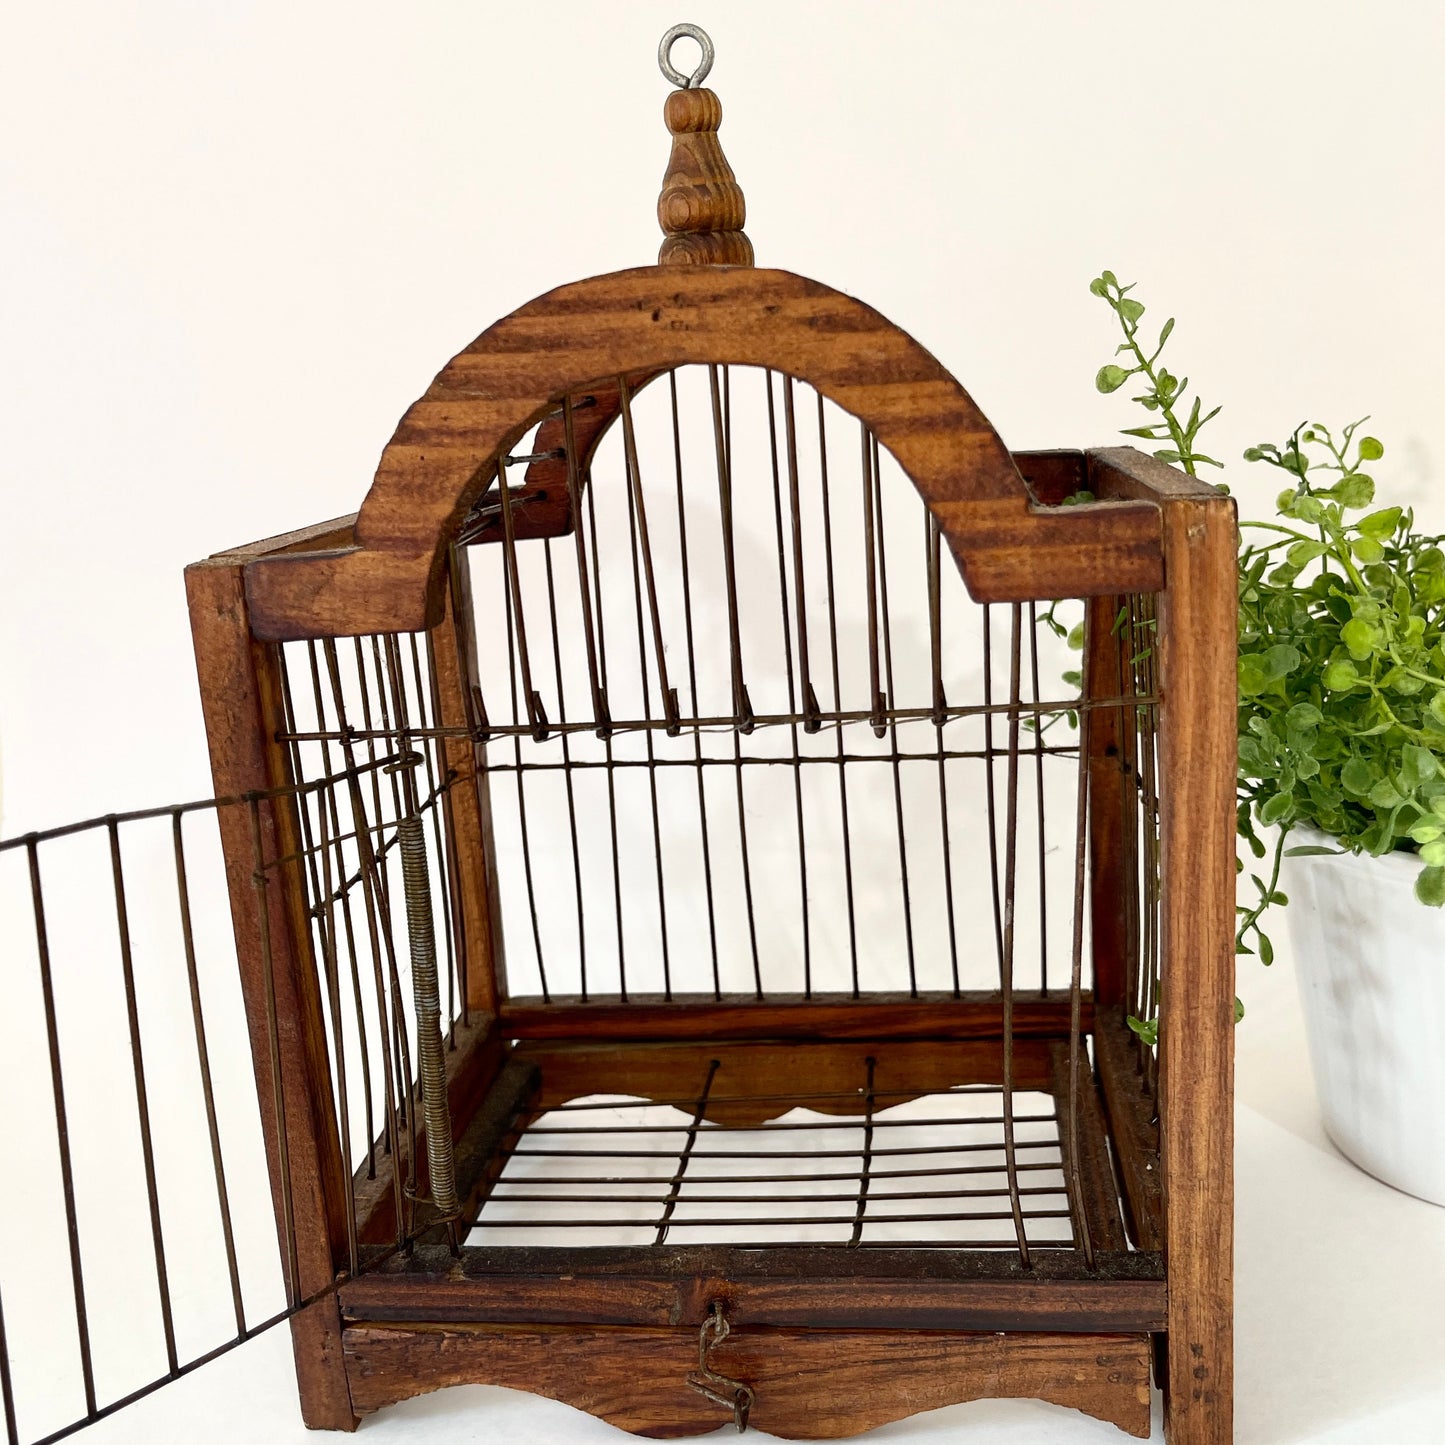 Antique Small Wood Birdcage for Hanging or Tabletop, Wood and WIre